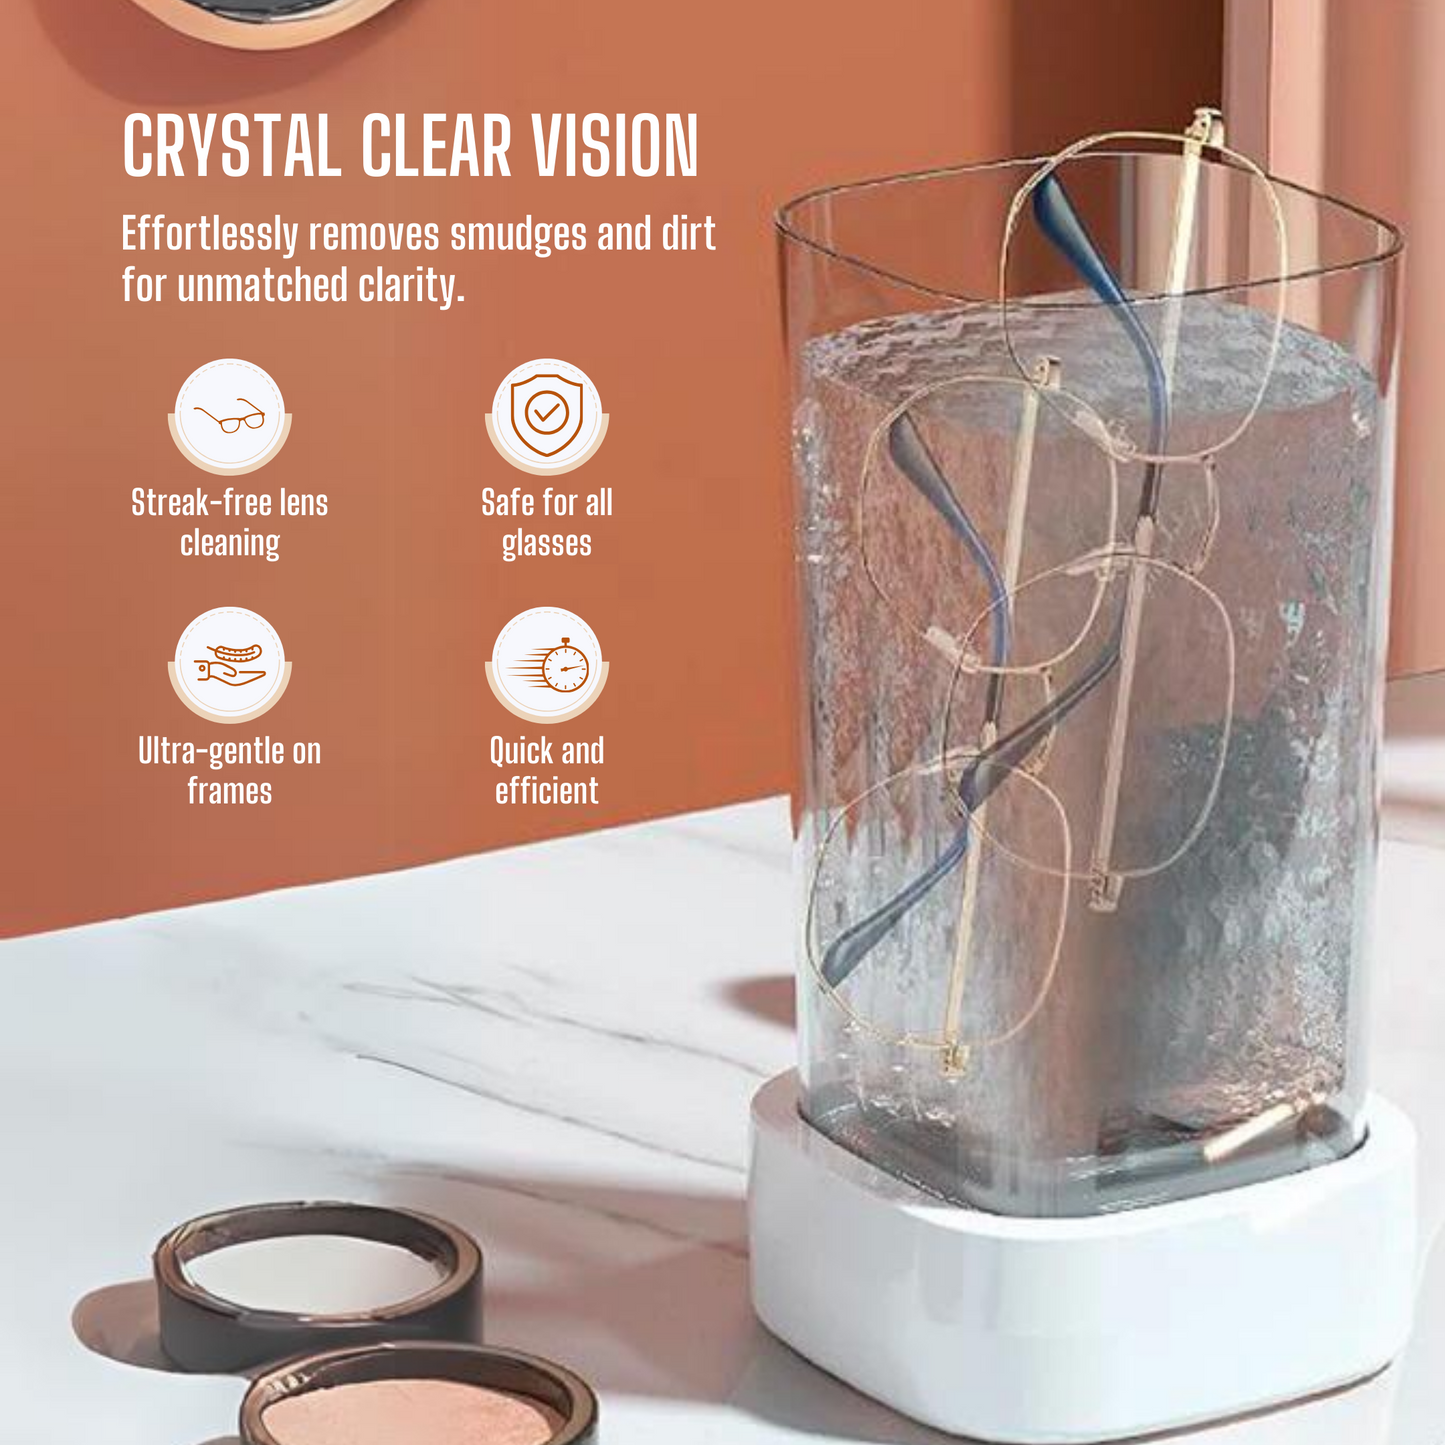 Powerful Ultrasonic Rechargeable Cleaner: Eco-Friendly & Compact Design with Quick Dry function for Jewelry, Glasses, Makeup Brushes, and Delicate Items